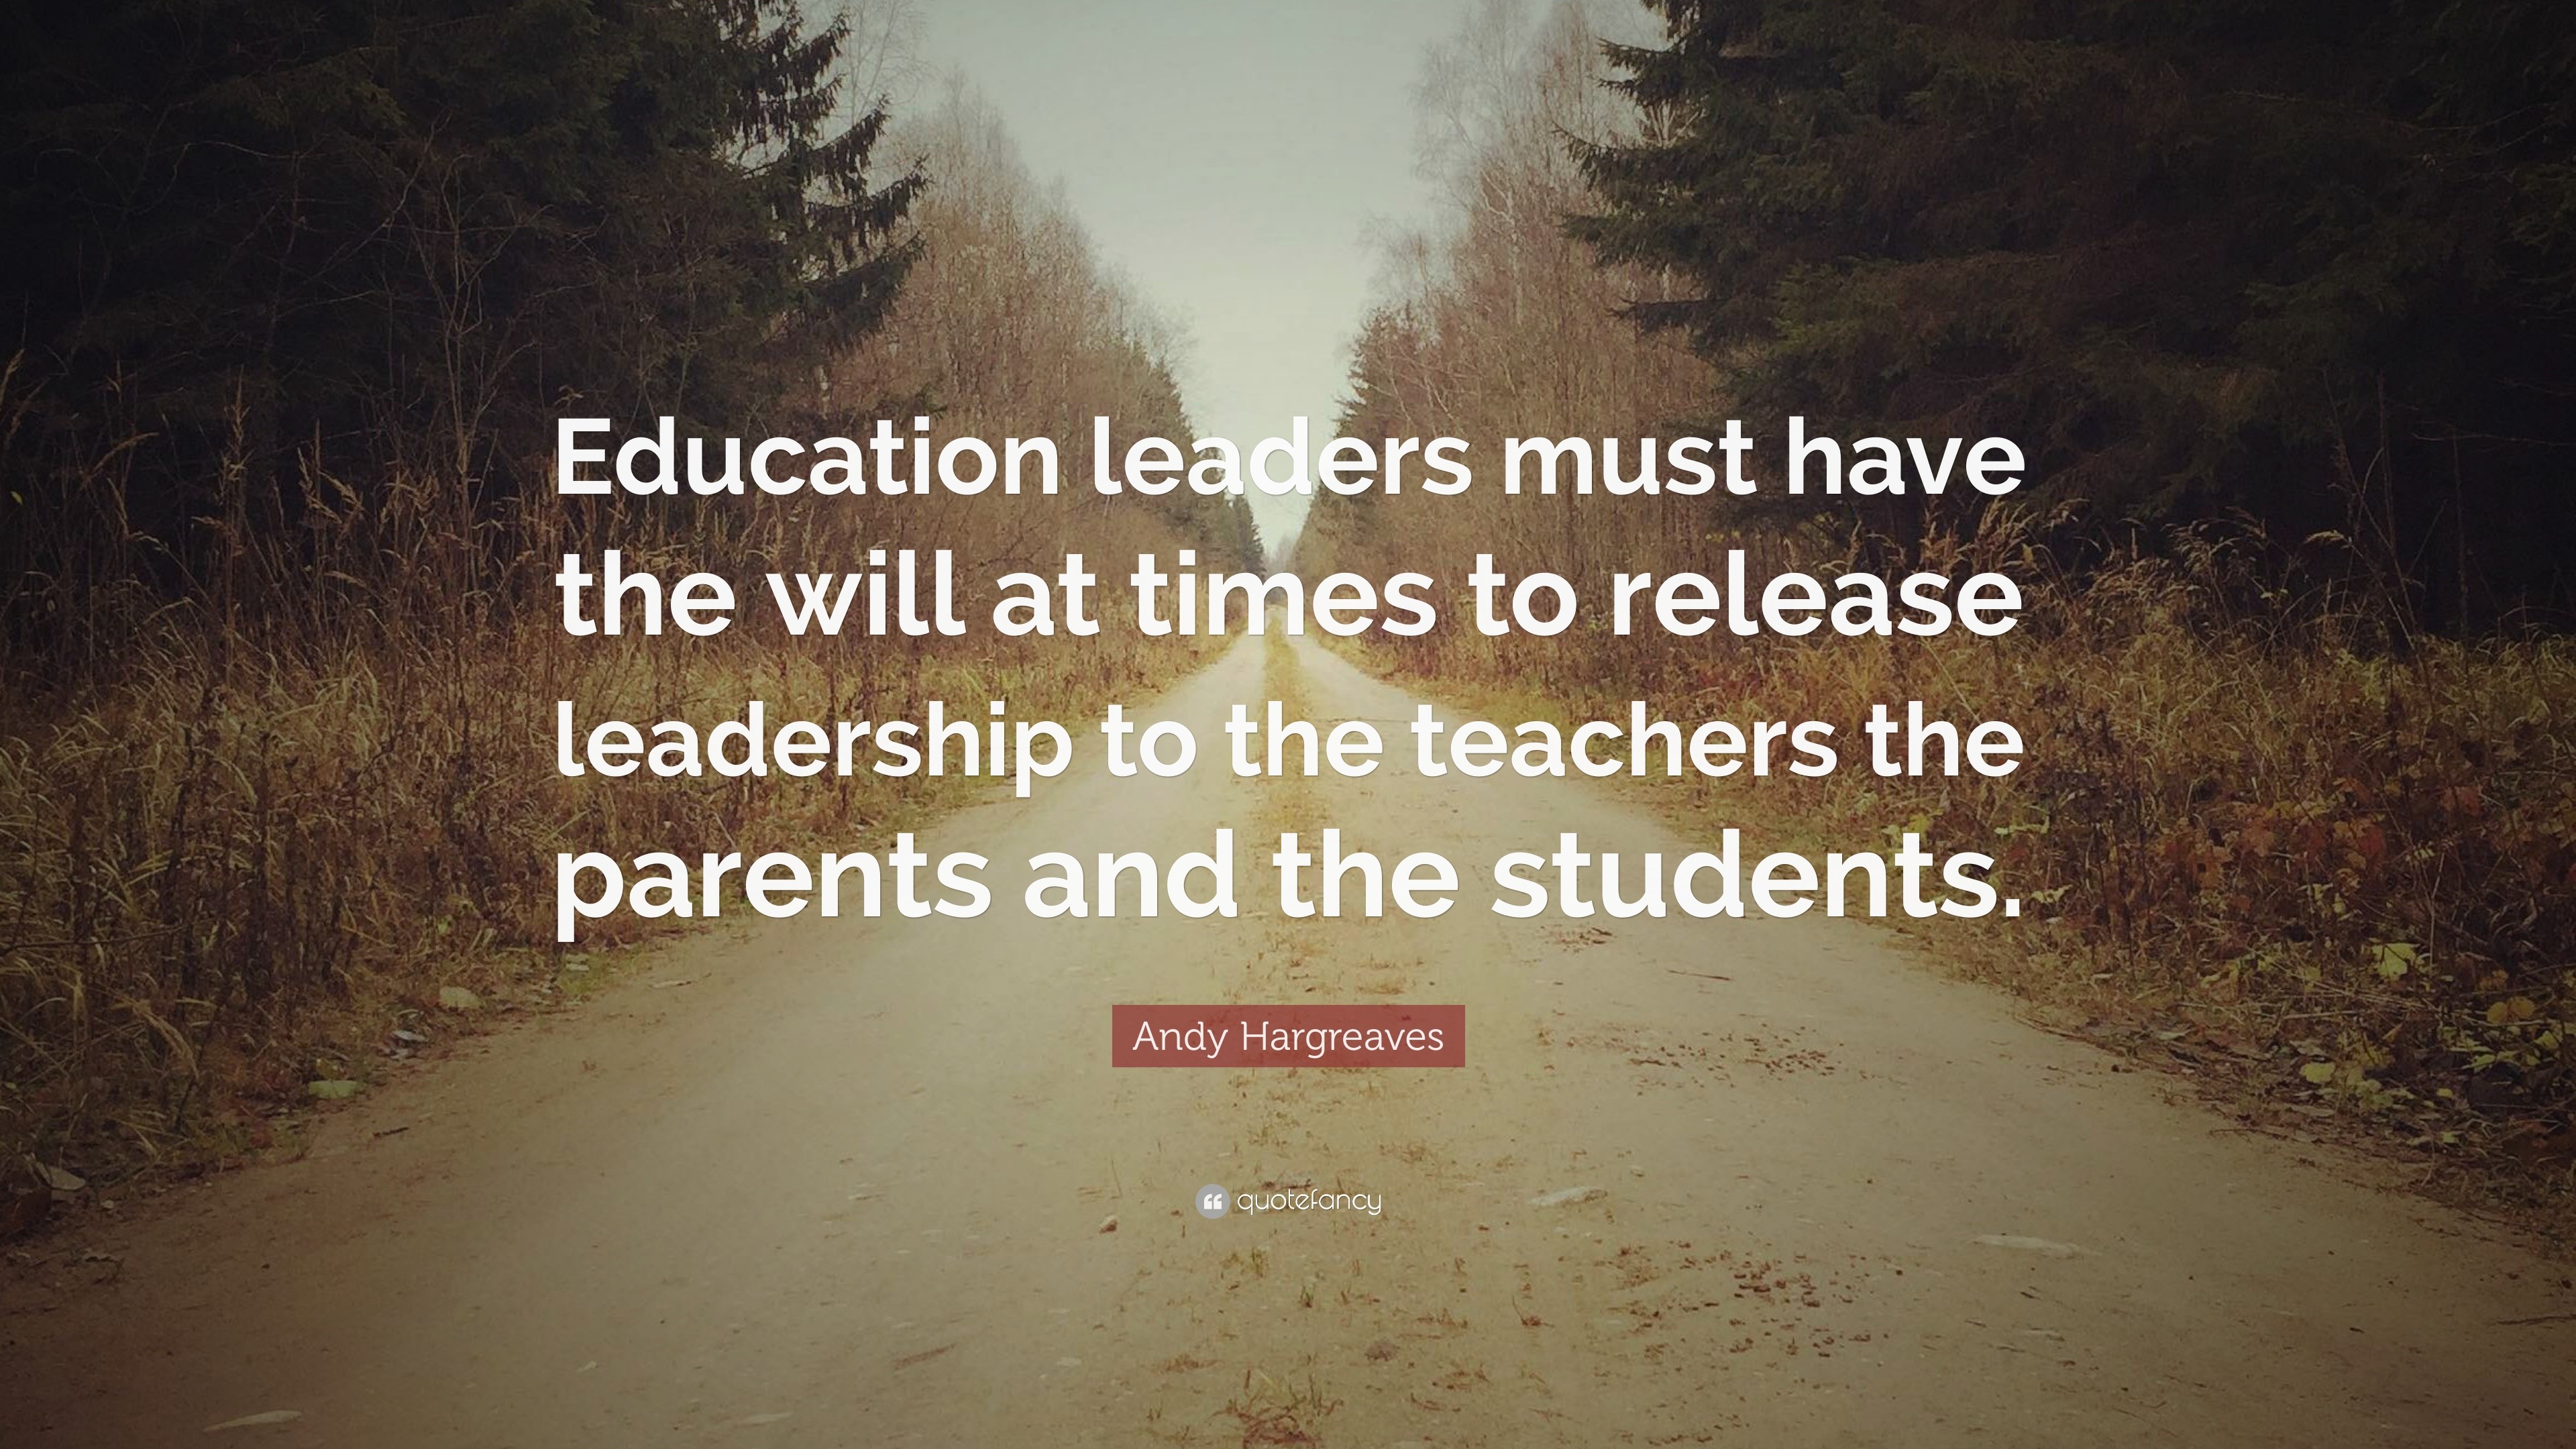 Andy Hargreaves Quote: “Education leaders must have the will at times